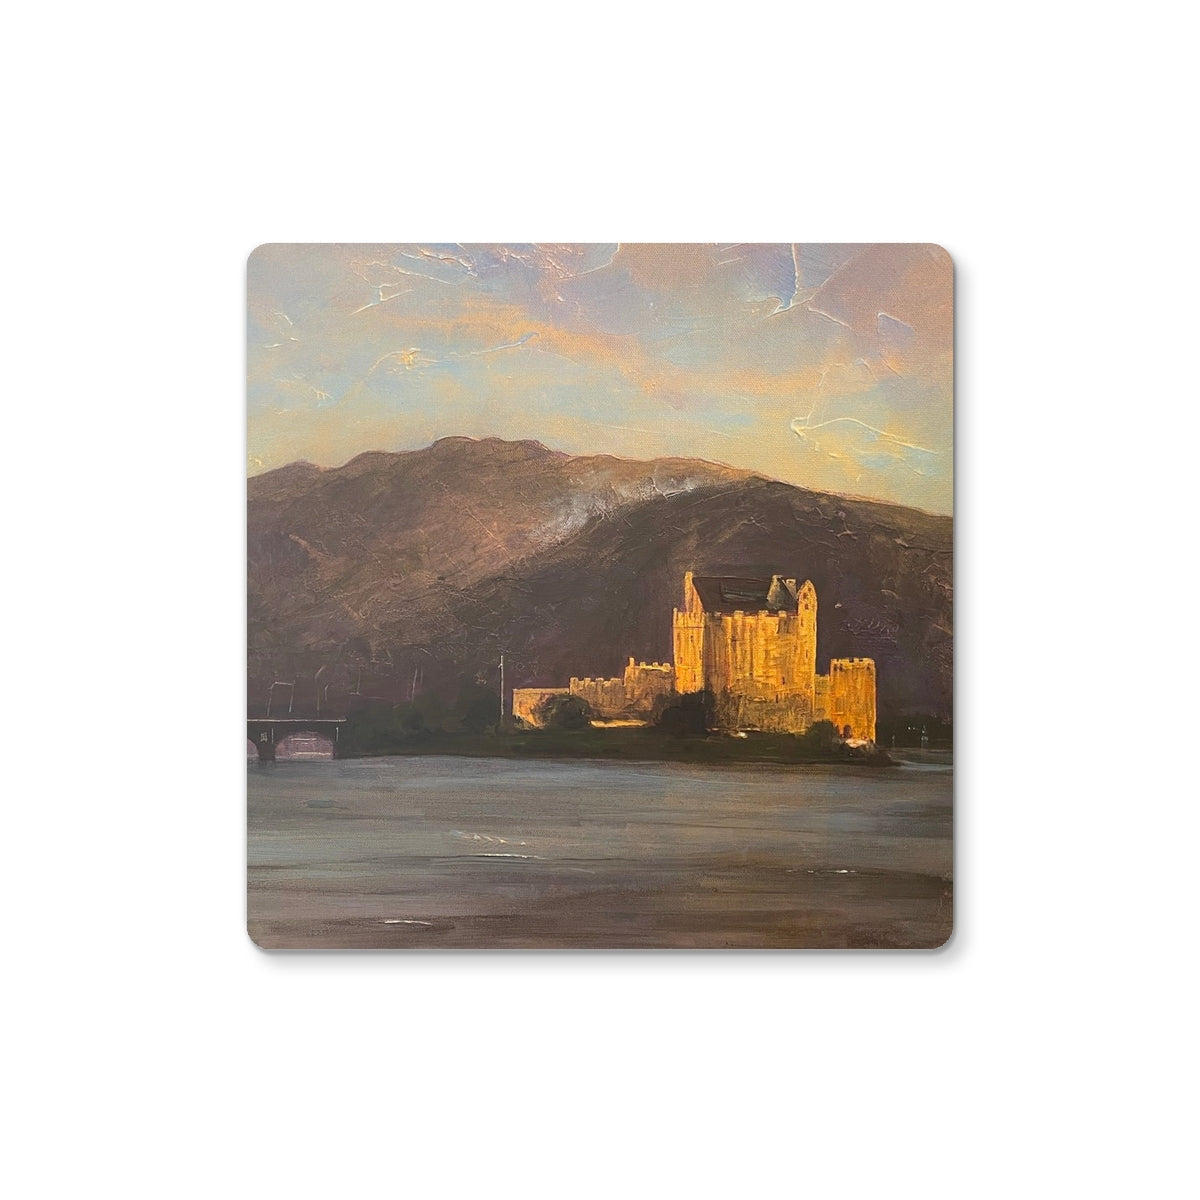 Eilean Donan Castle Art Gifts Coaster-Coasters-Historic & Iconic Scotland Art Gallery-Single Coaster-Paintings, Prints, Homeware, Art Gifts From Scotland By Scottish Artist Kevin Hunter